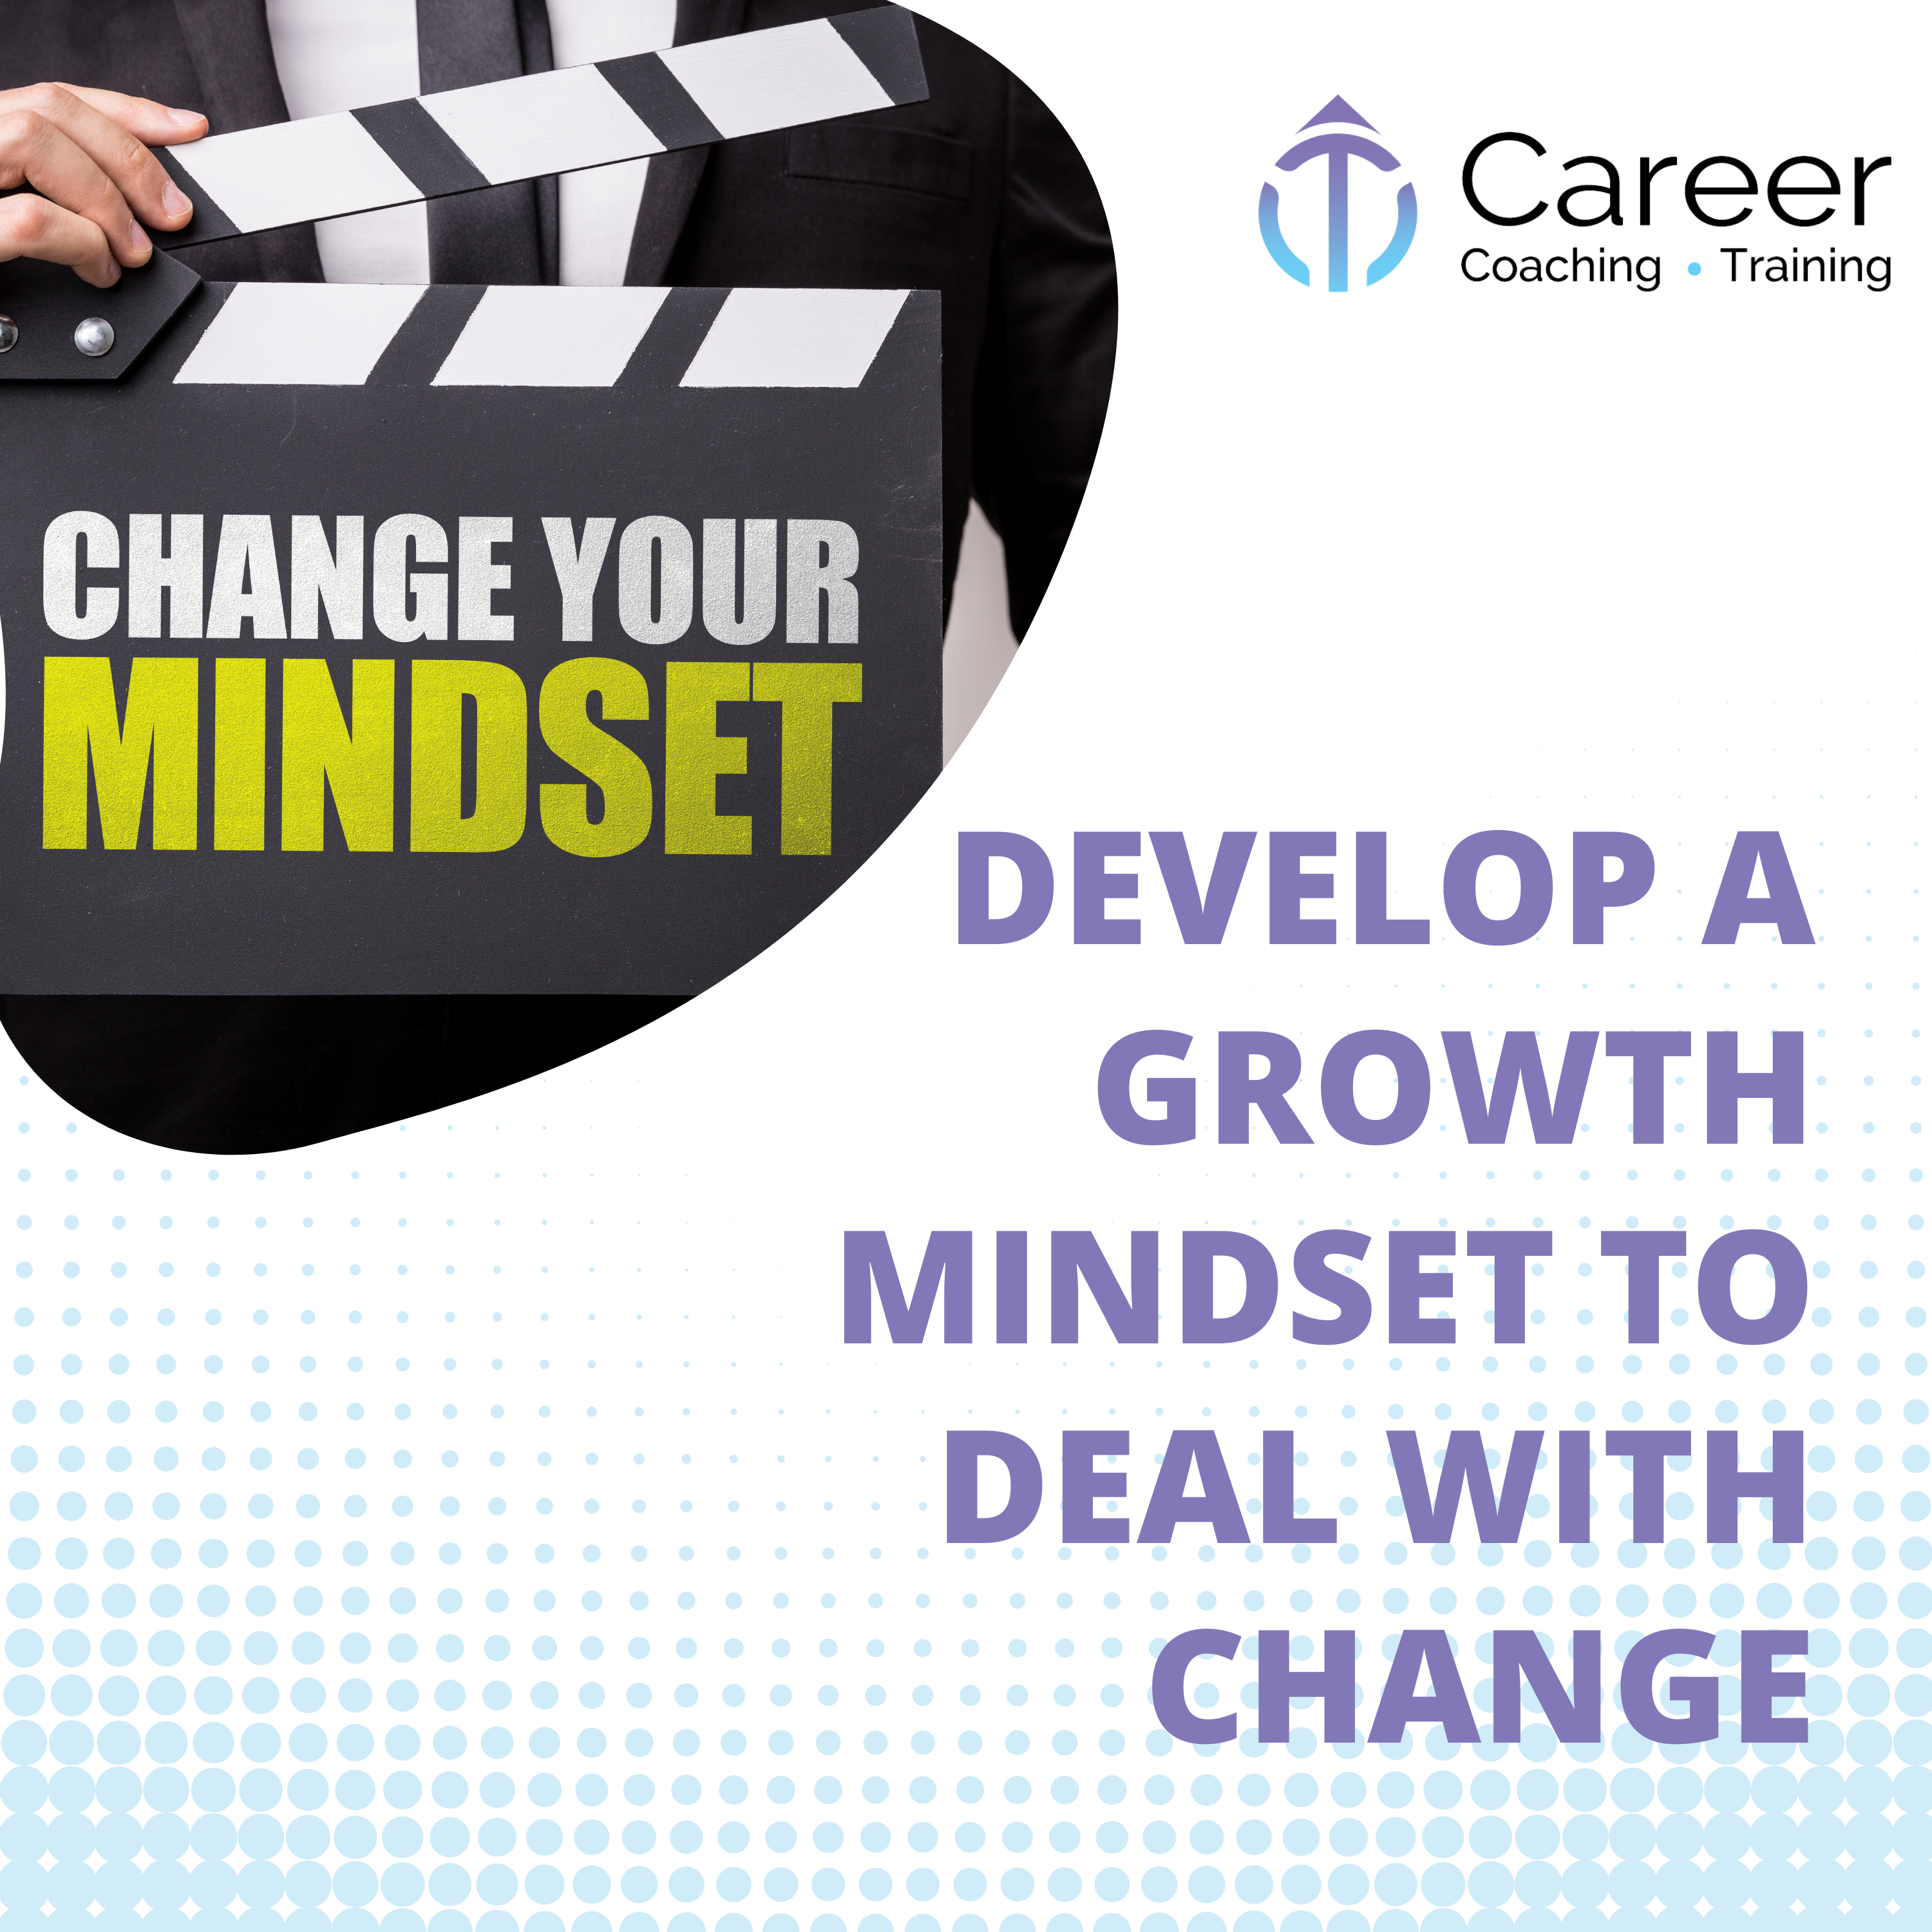 Develop a Growth Mindset to Deal with Change